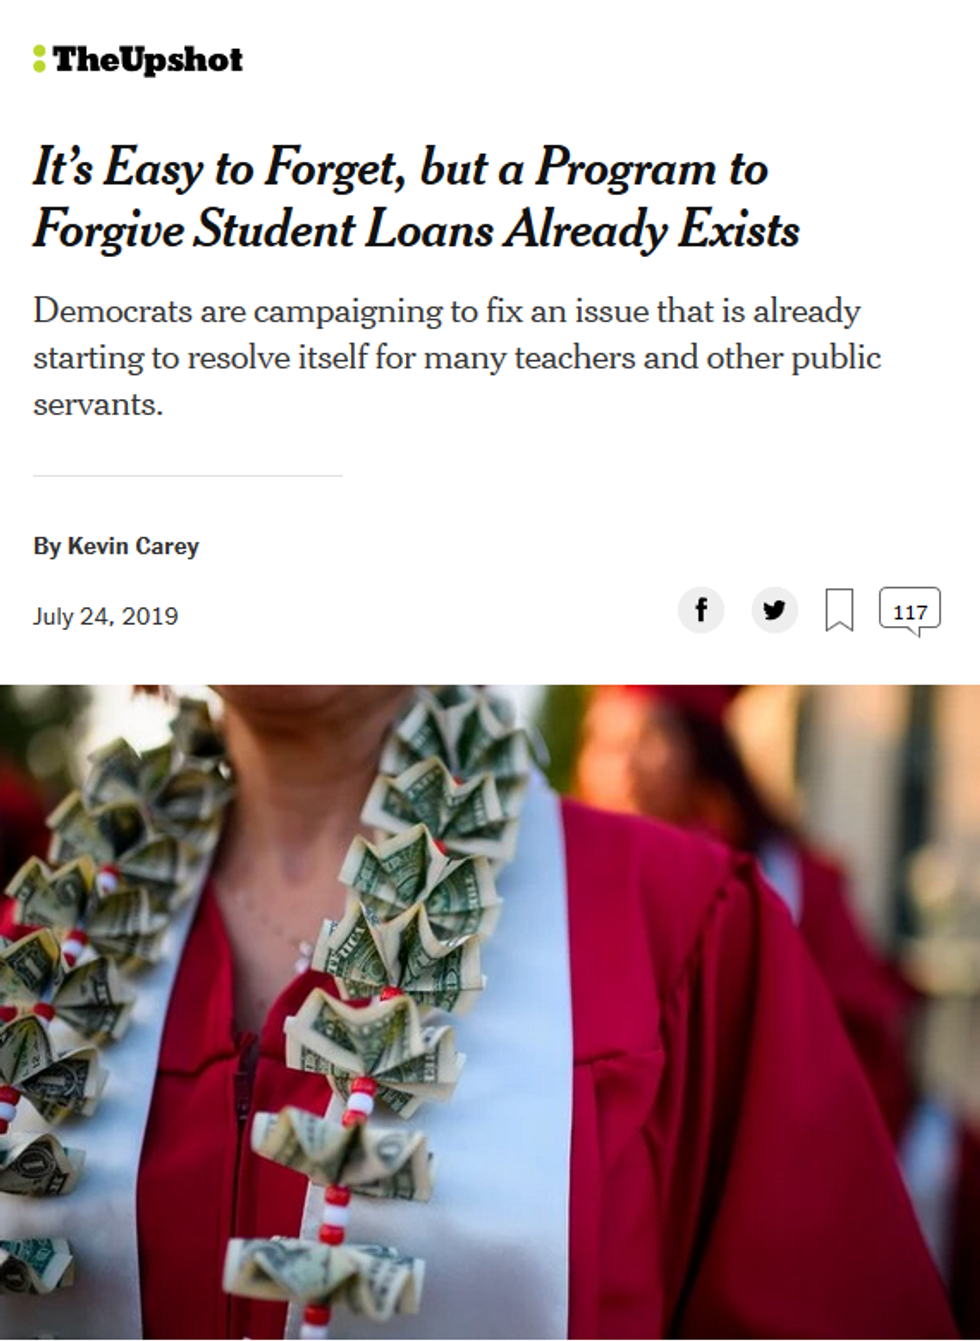 Upshot: It's Easy to Forget, but a Program to Forgive Student Loans Already Exists